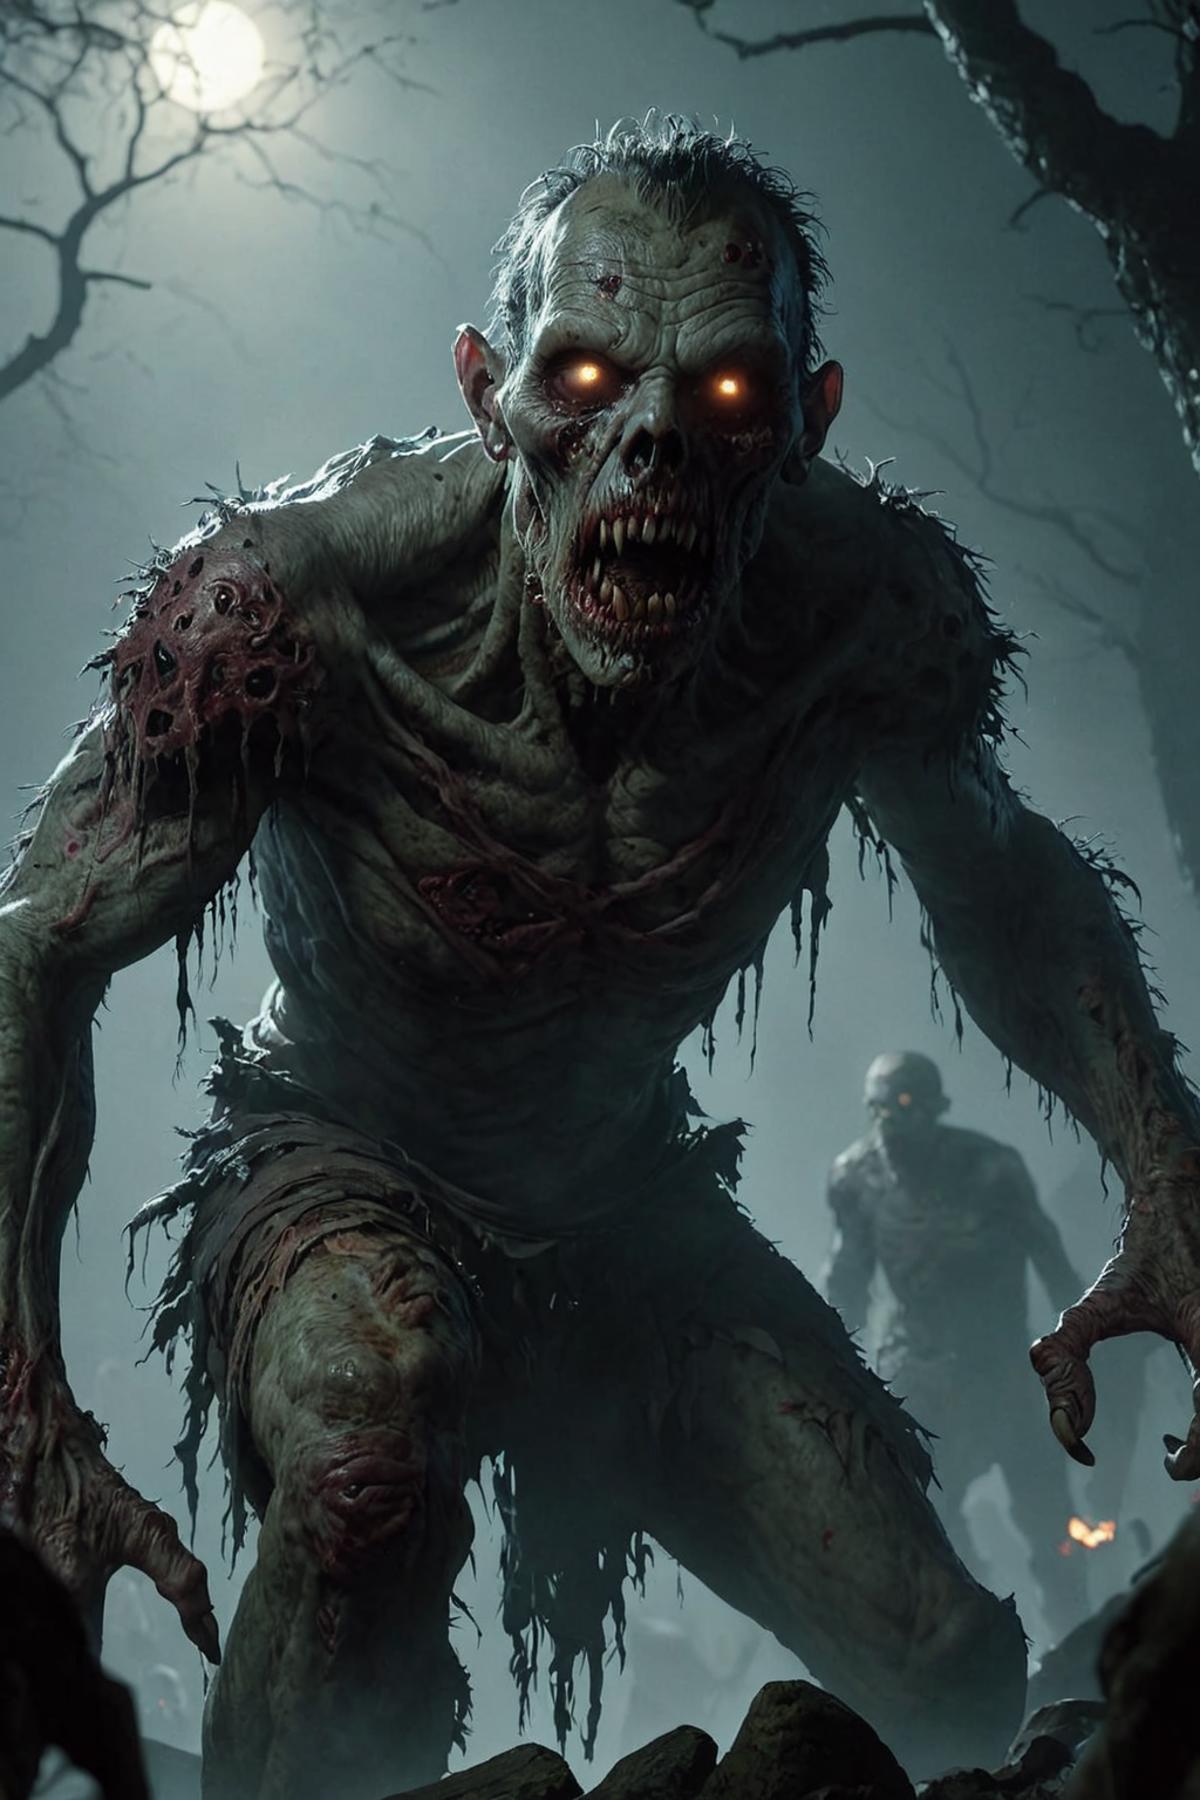 Zombie Game Character with Glowing Eyes in a Forest Scene